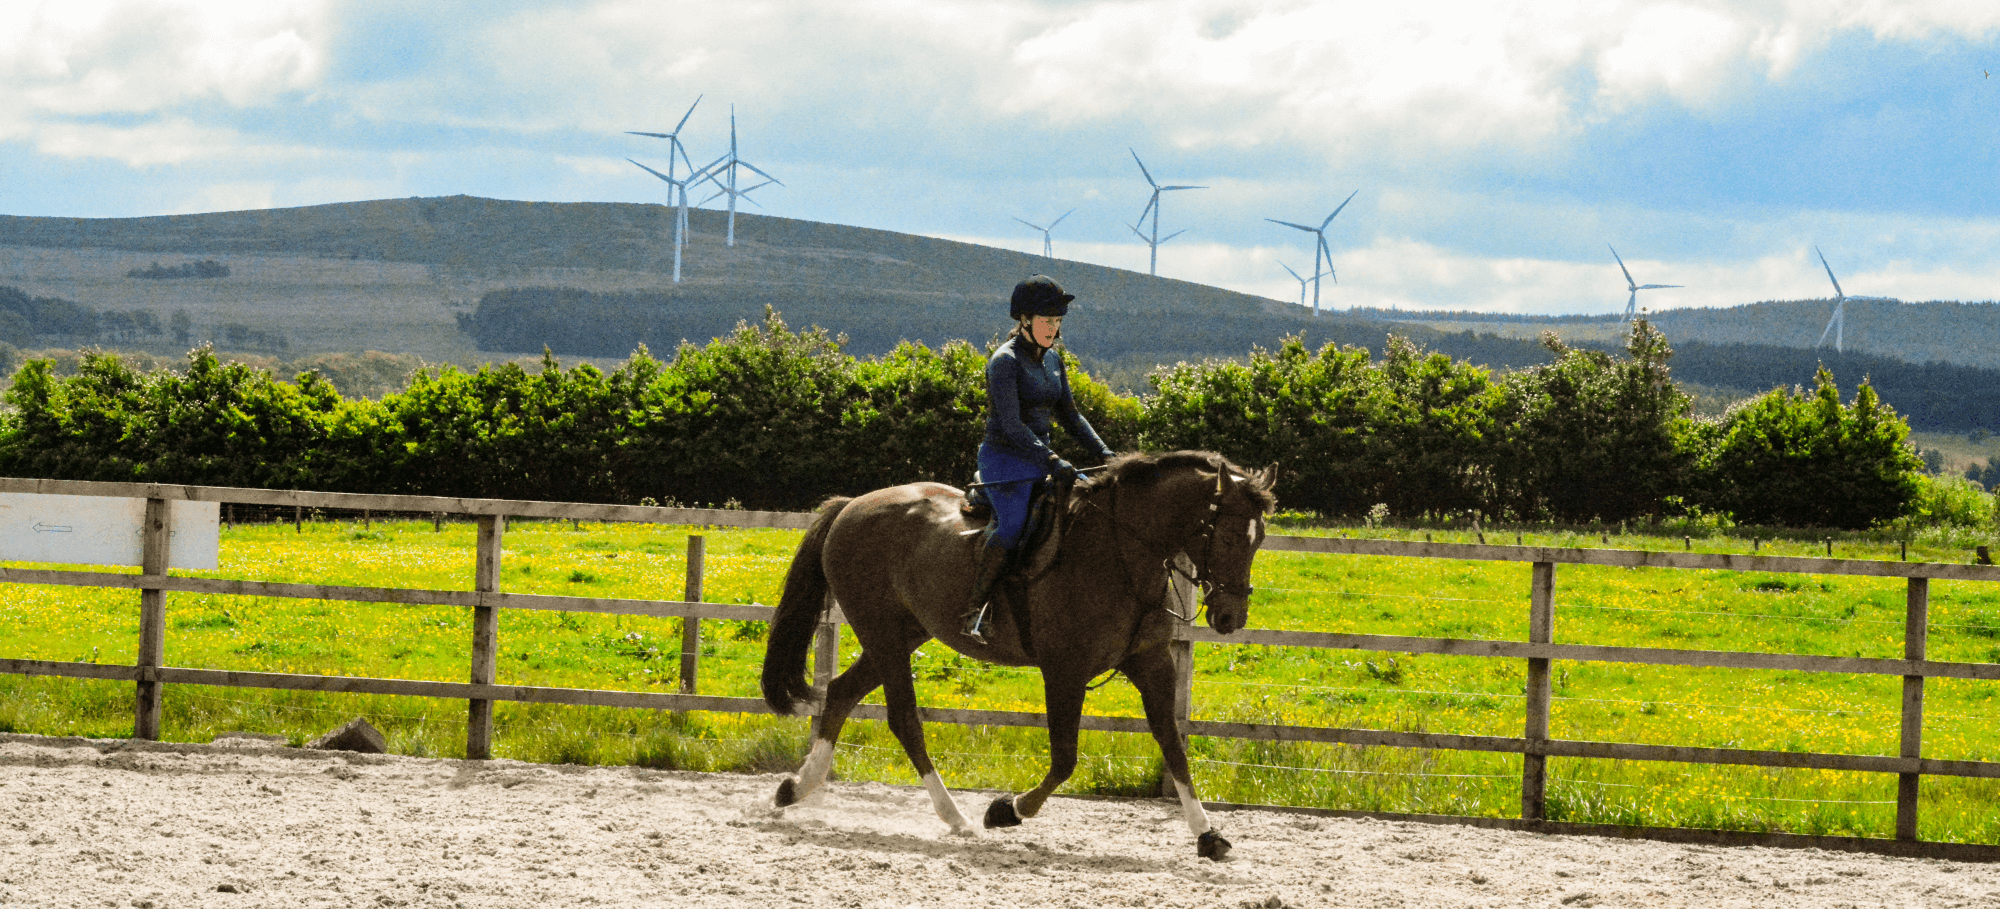 a person in a helmet riding a horse in a paddock